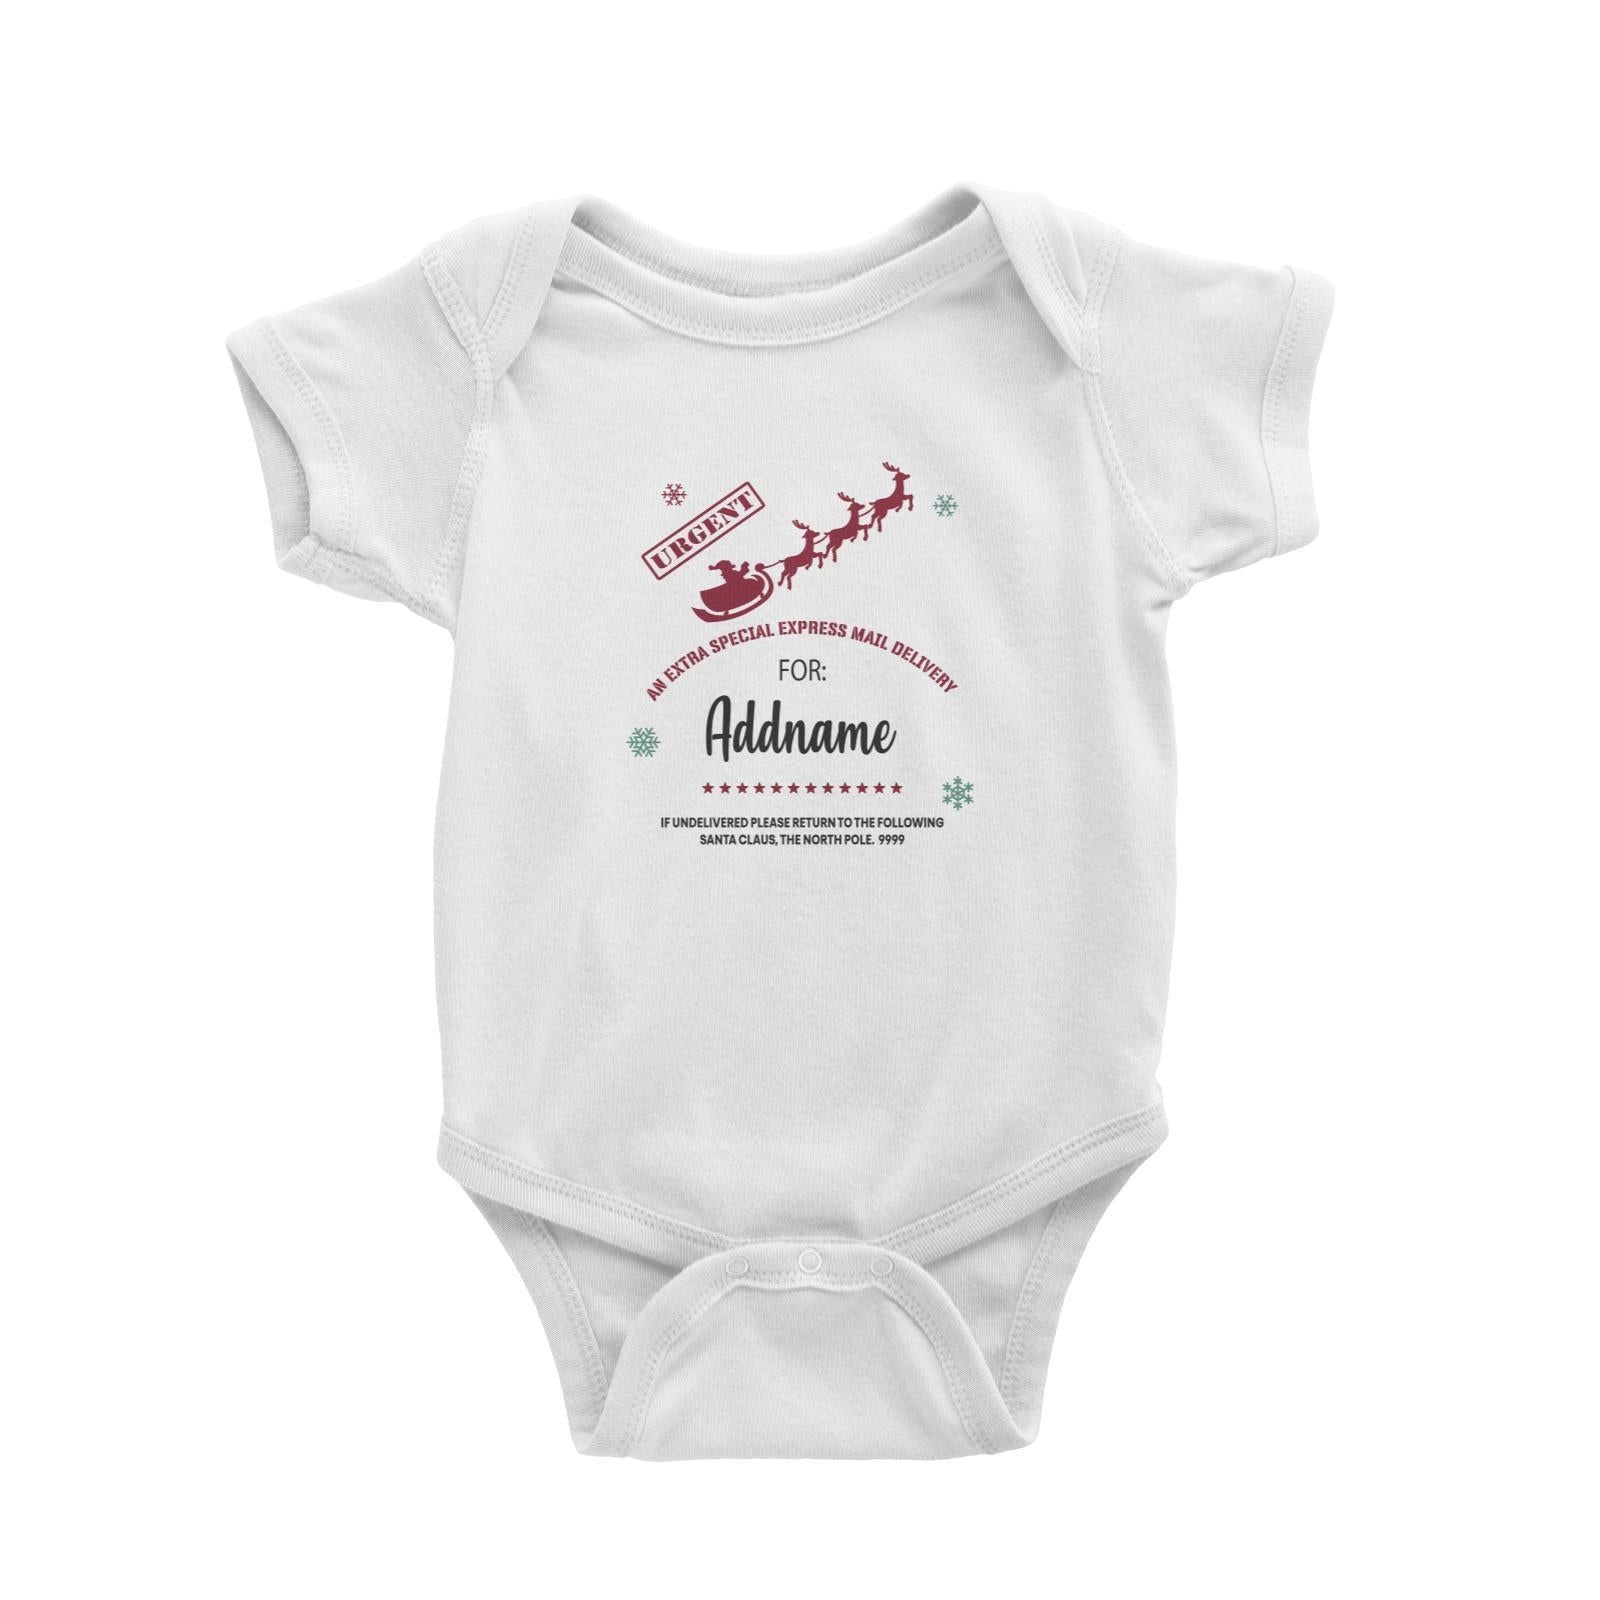 Xmas An Extra Special Express Mail Delivery Baby Romper